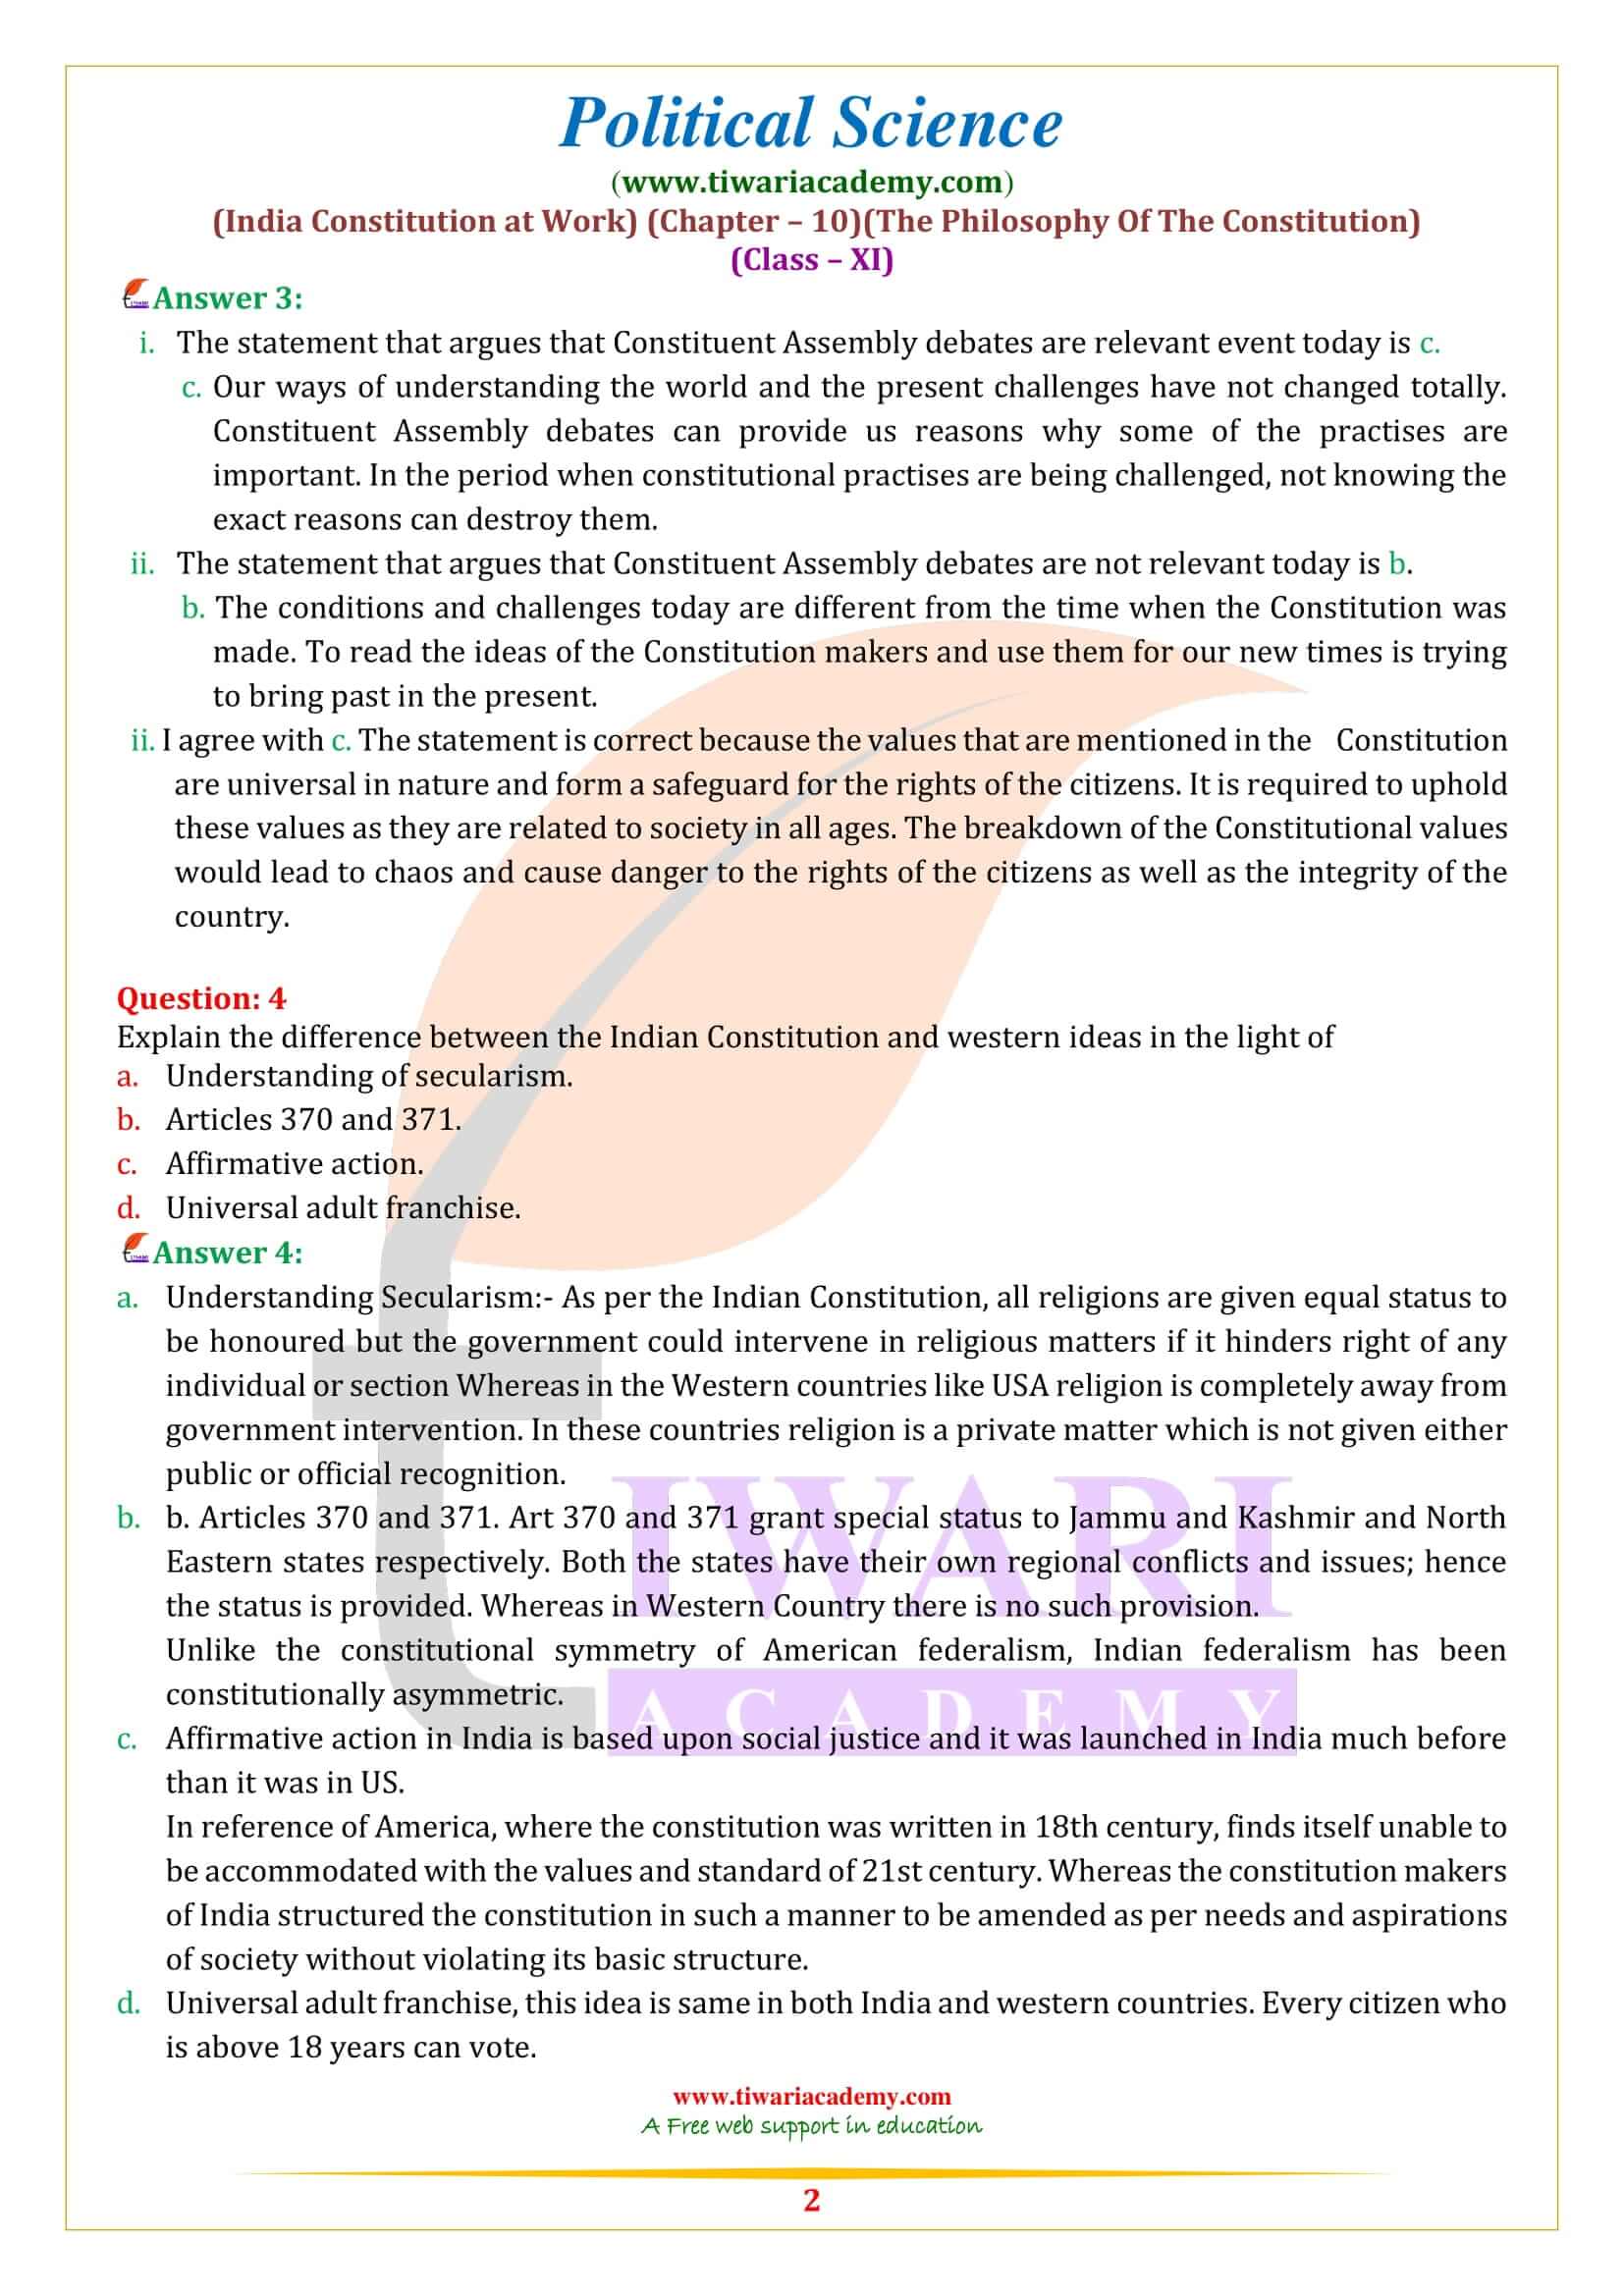 NCERT Solutions for Class 11 Political Science Chapter 10